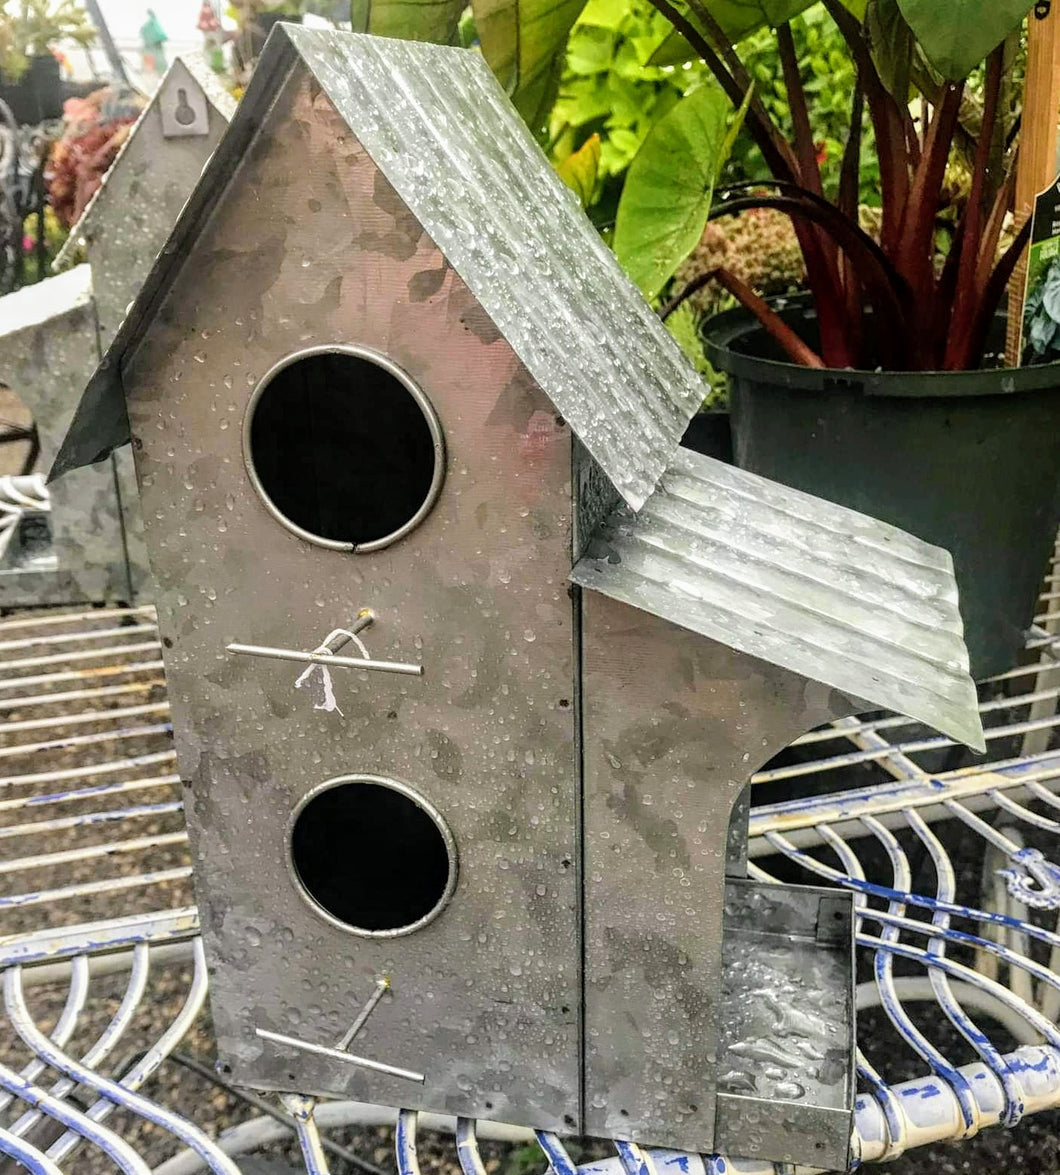 Silver galvanized metal birdhouse condo. There are 2 holes and a side shelter for a suet square